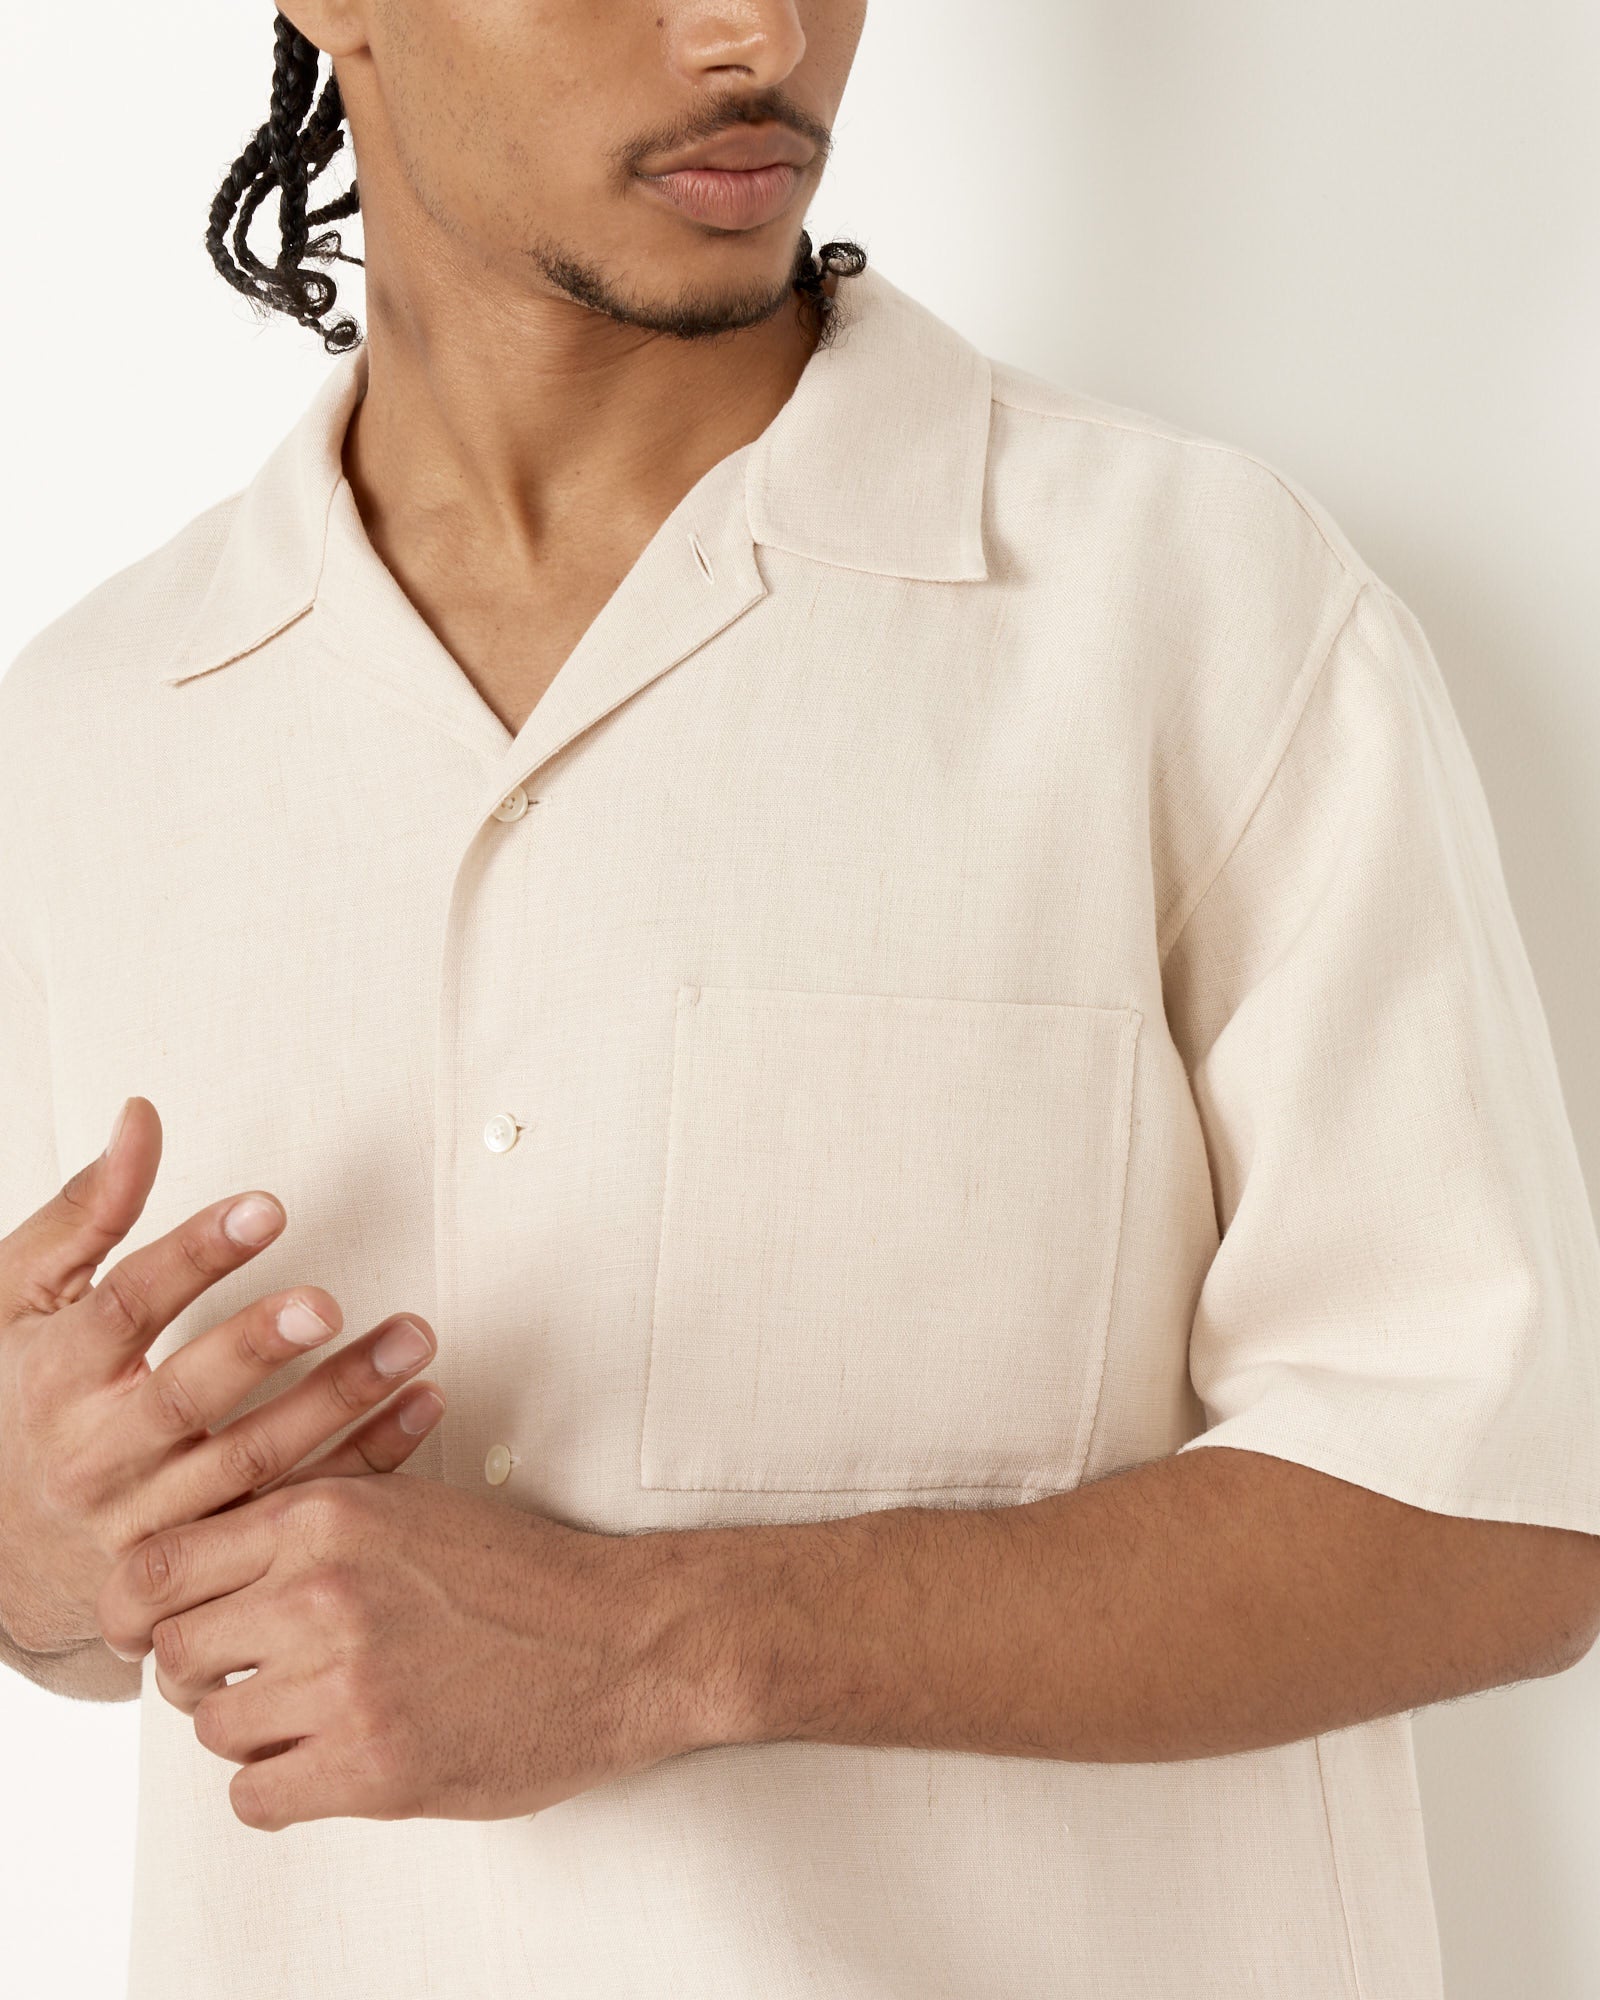 Hand Sewn Shirt in Ivory